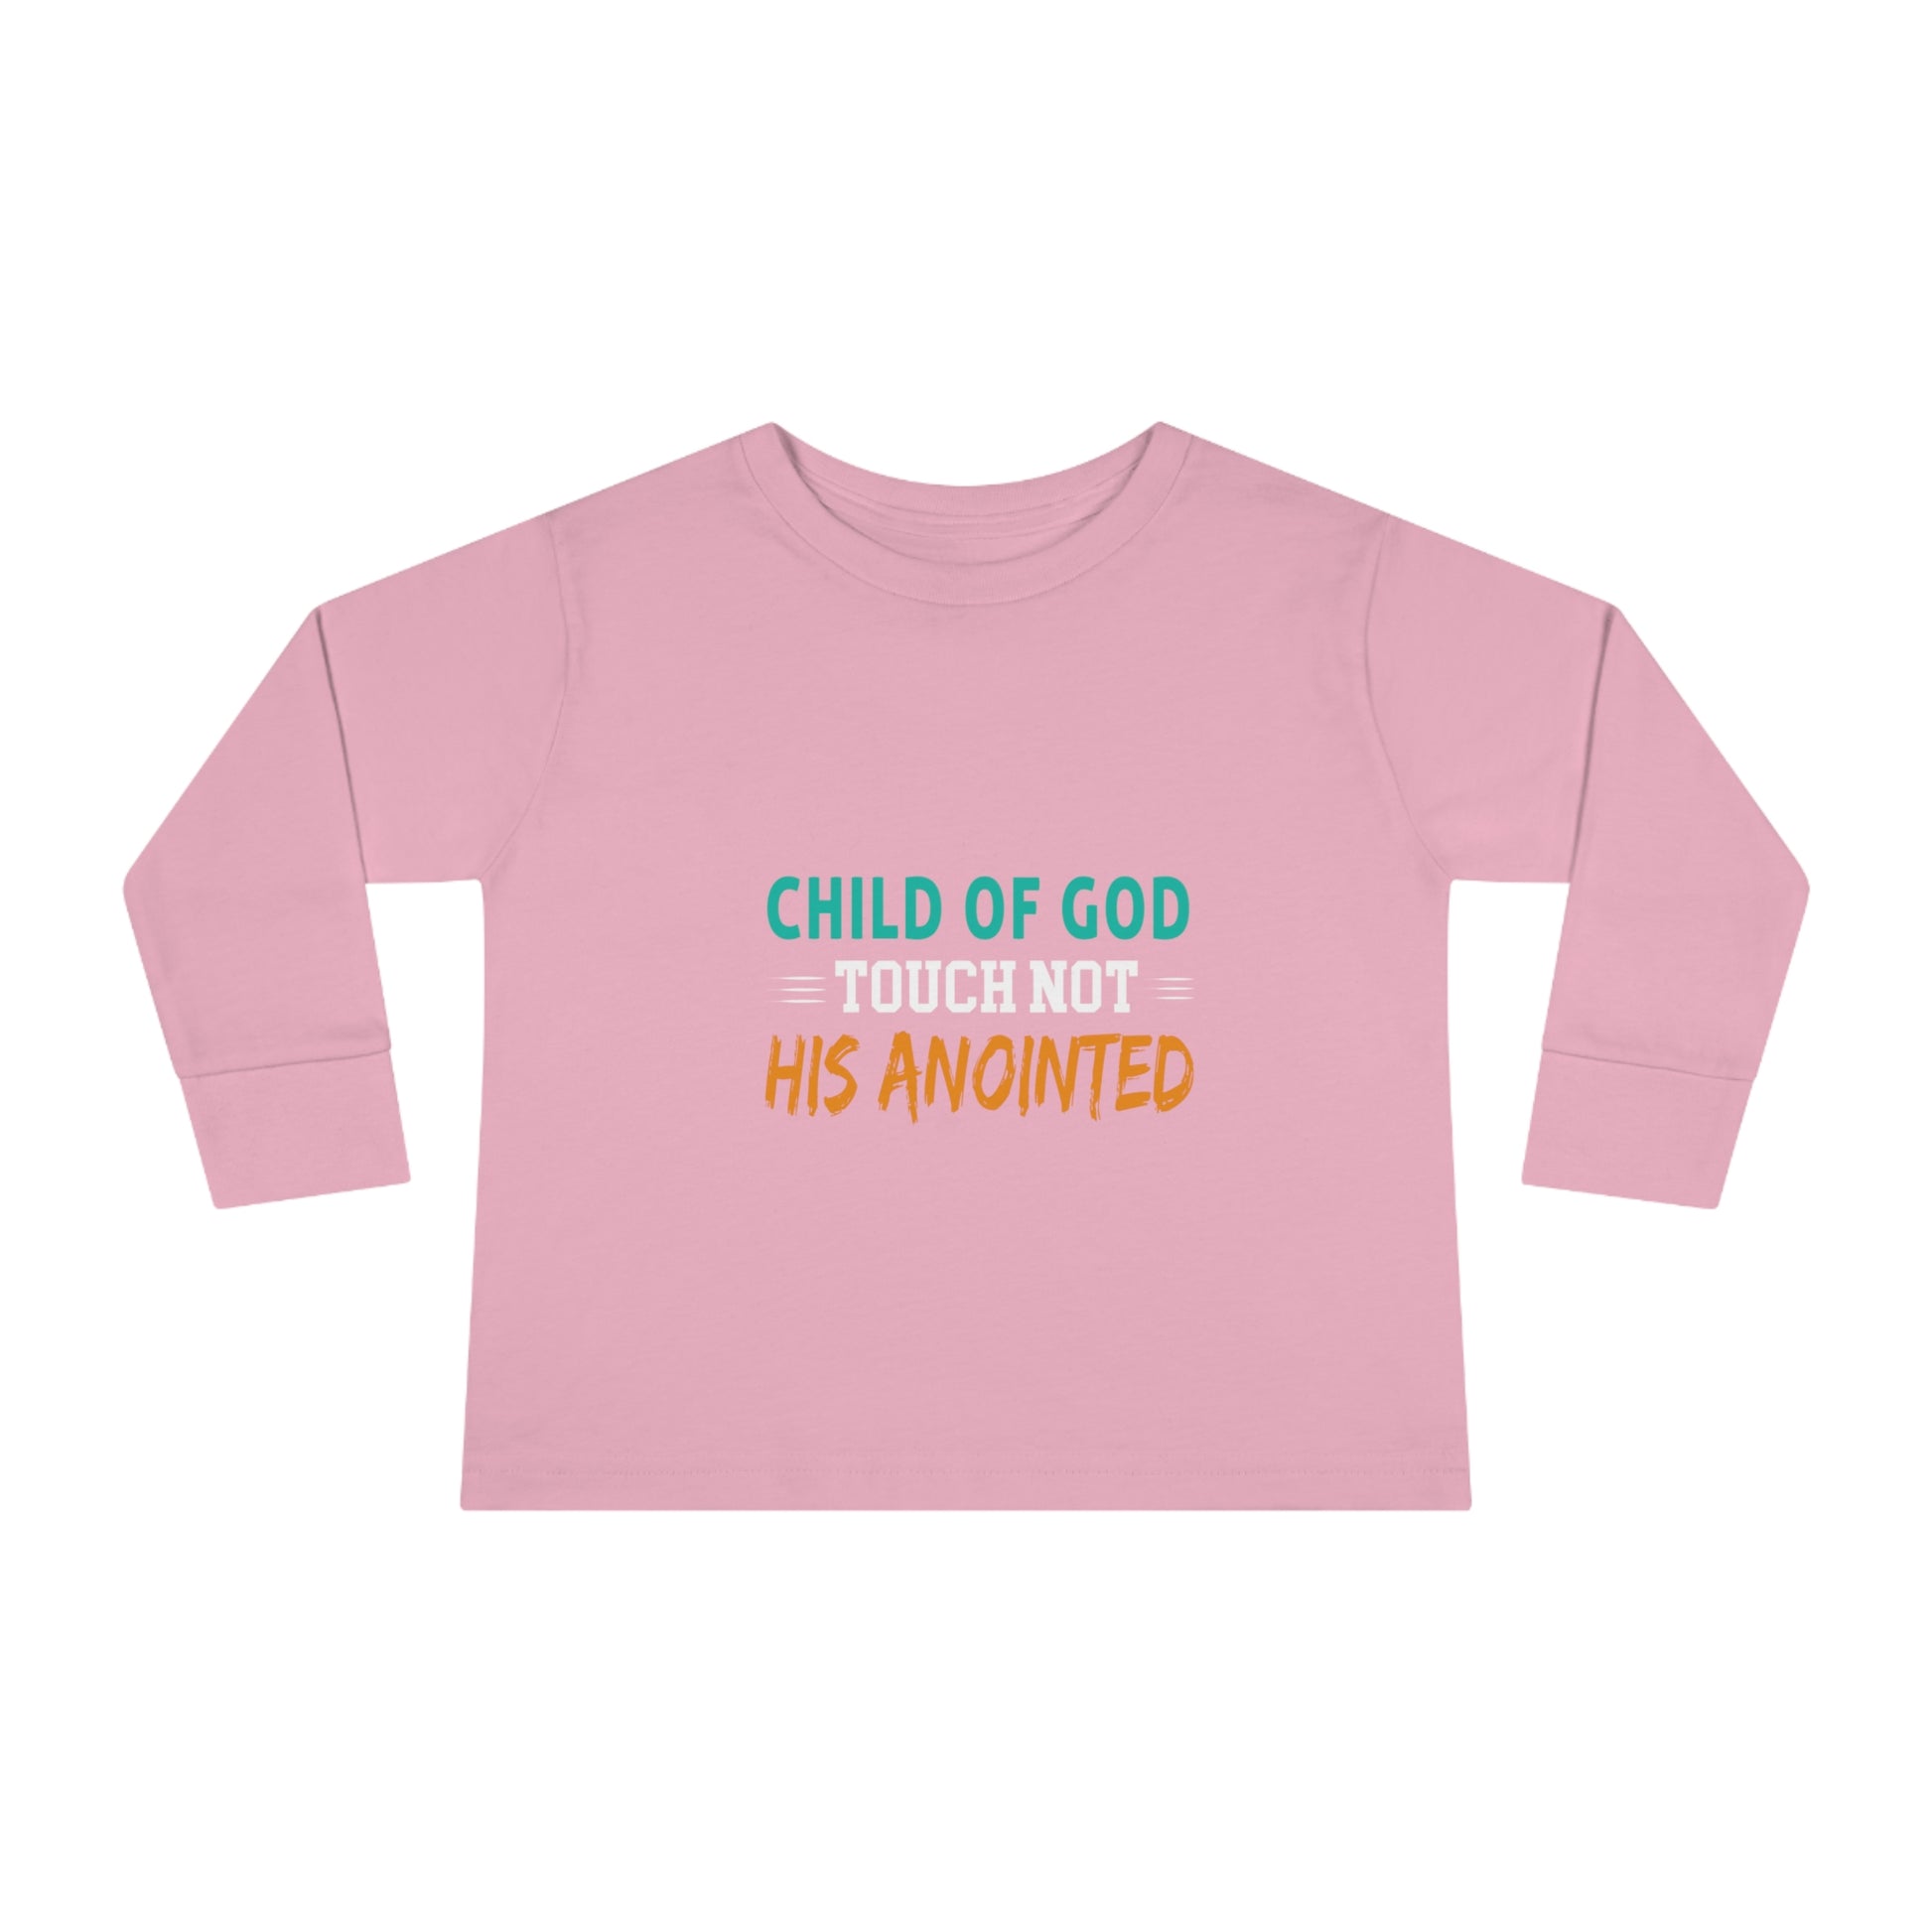 Child Of God Touch Not His Anointed Toddler Christian Sweatshirt Printify